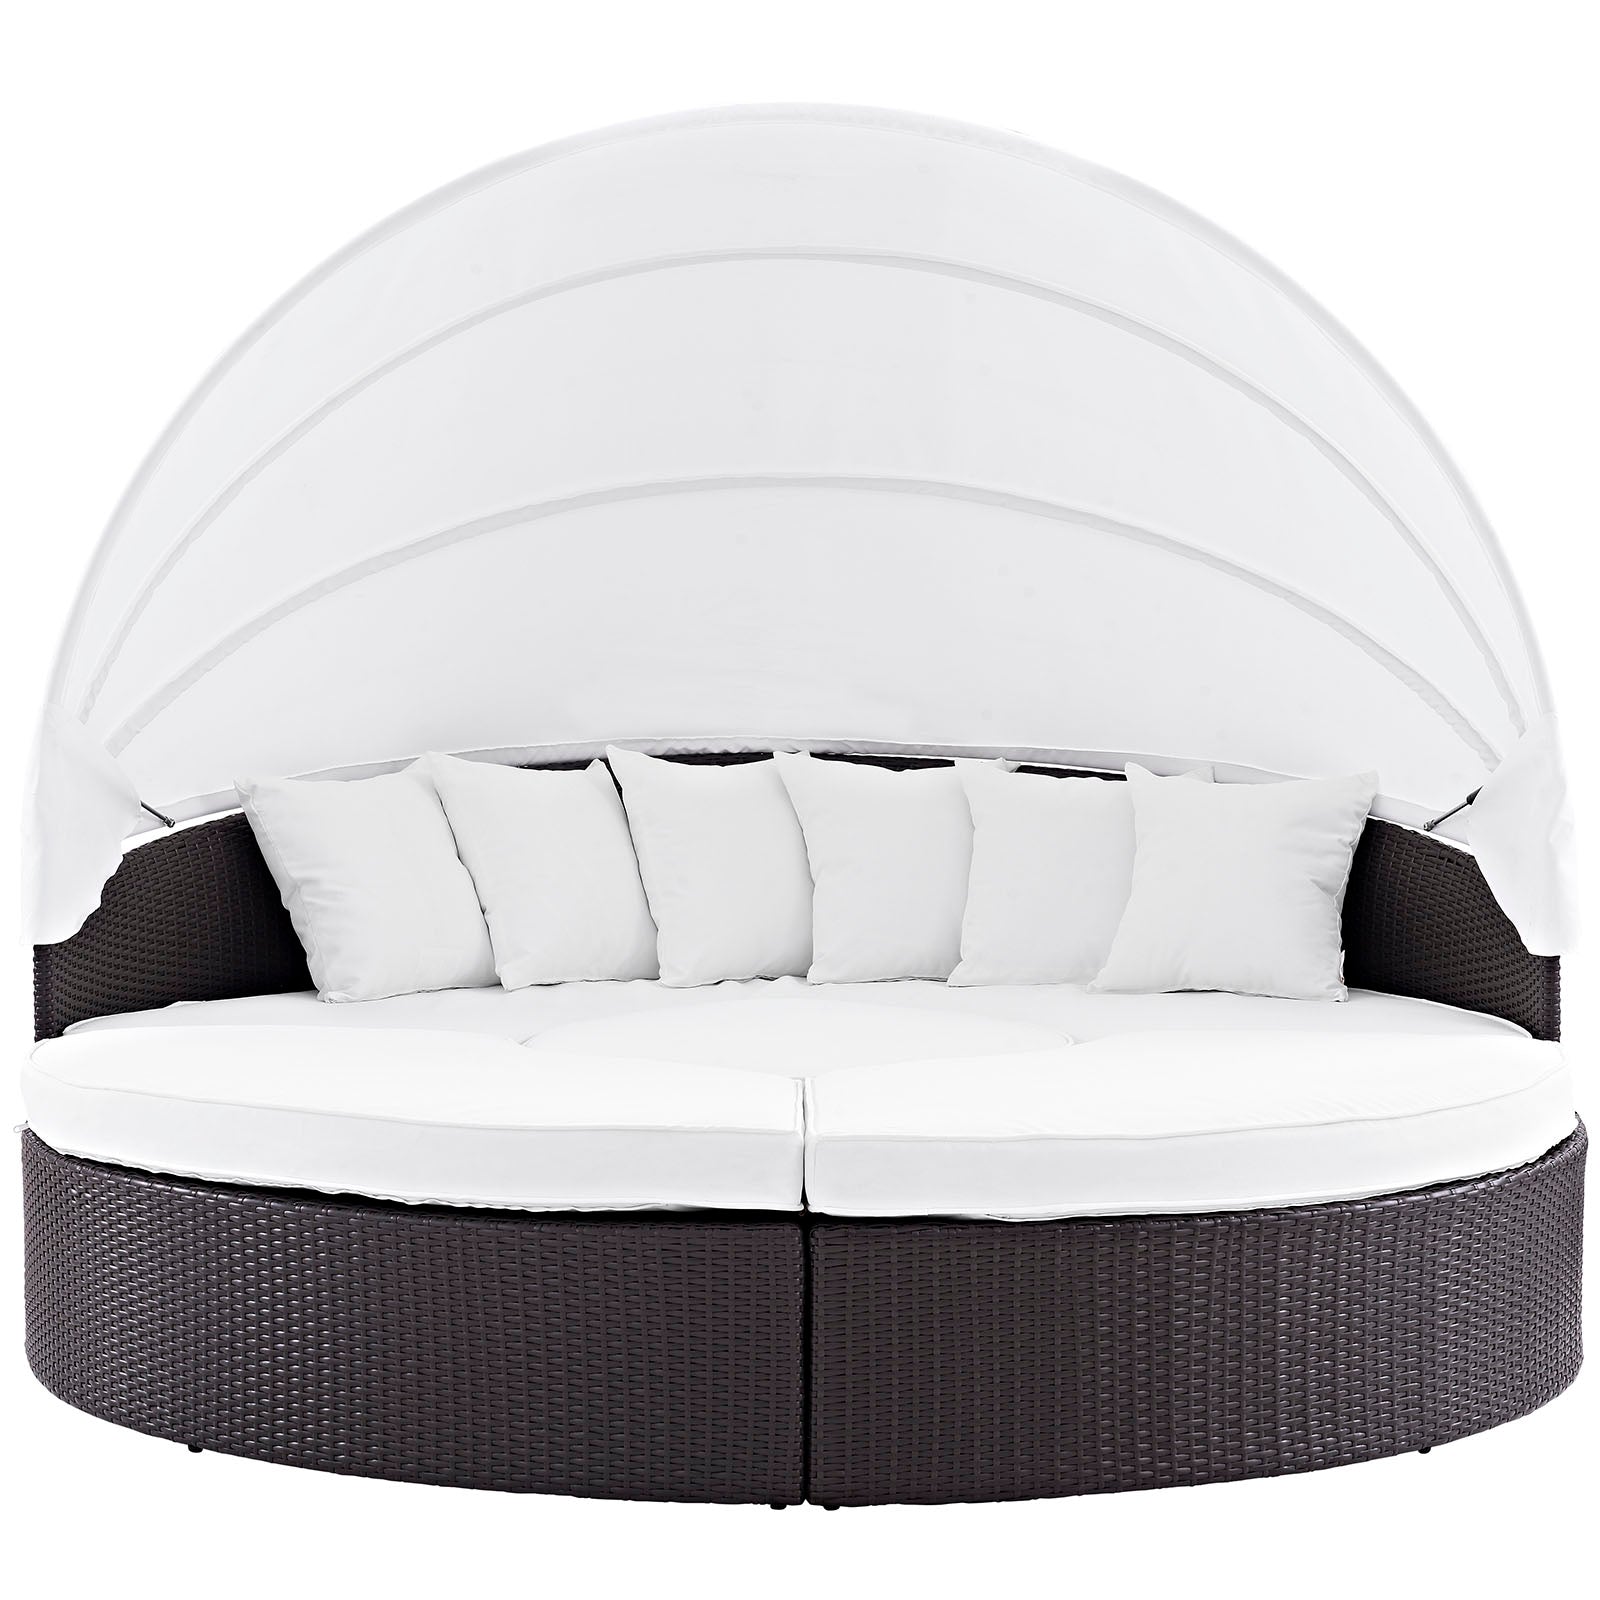 Modway Patio Daybeds - Quest Canopy Outdoor Patio Daybed Espresso White